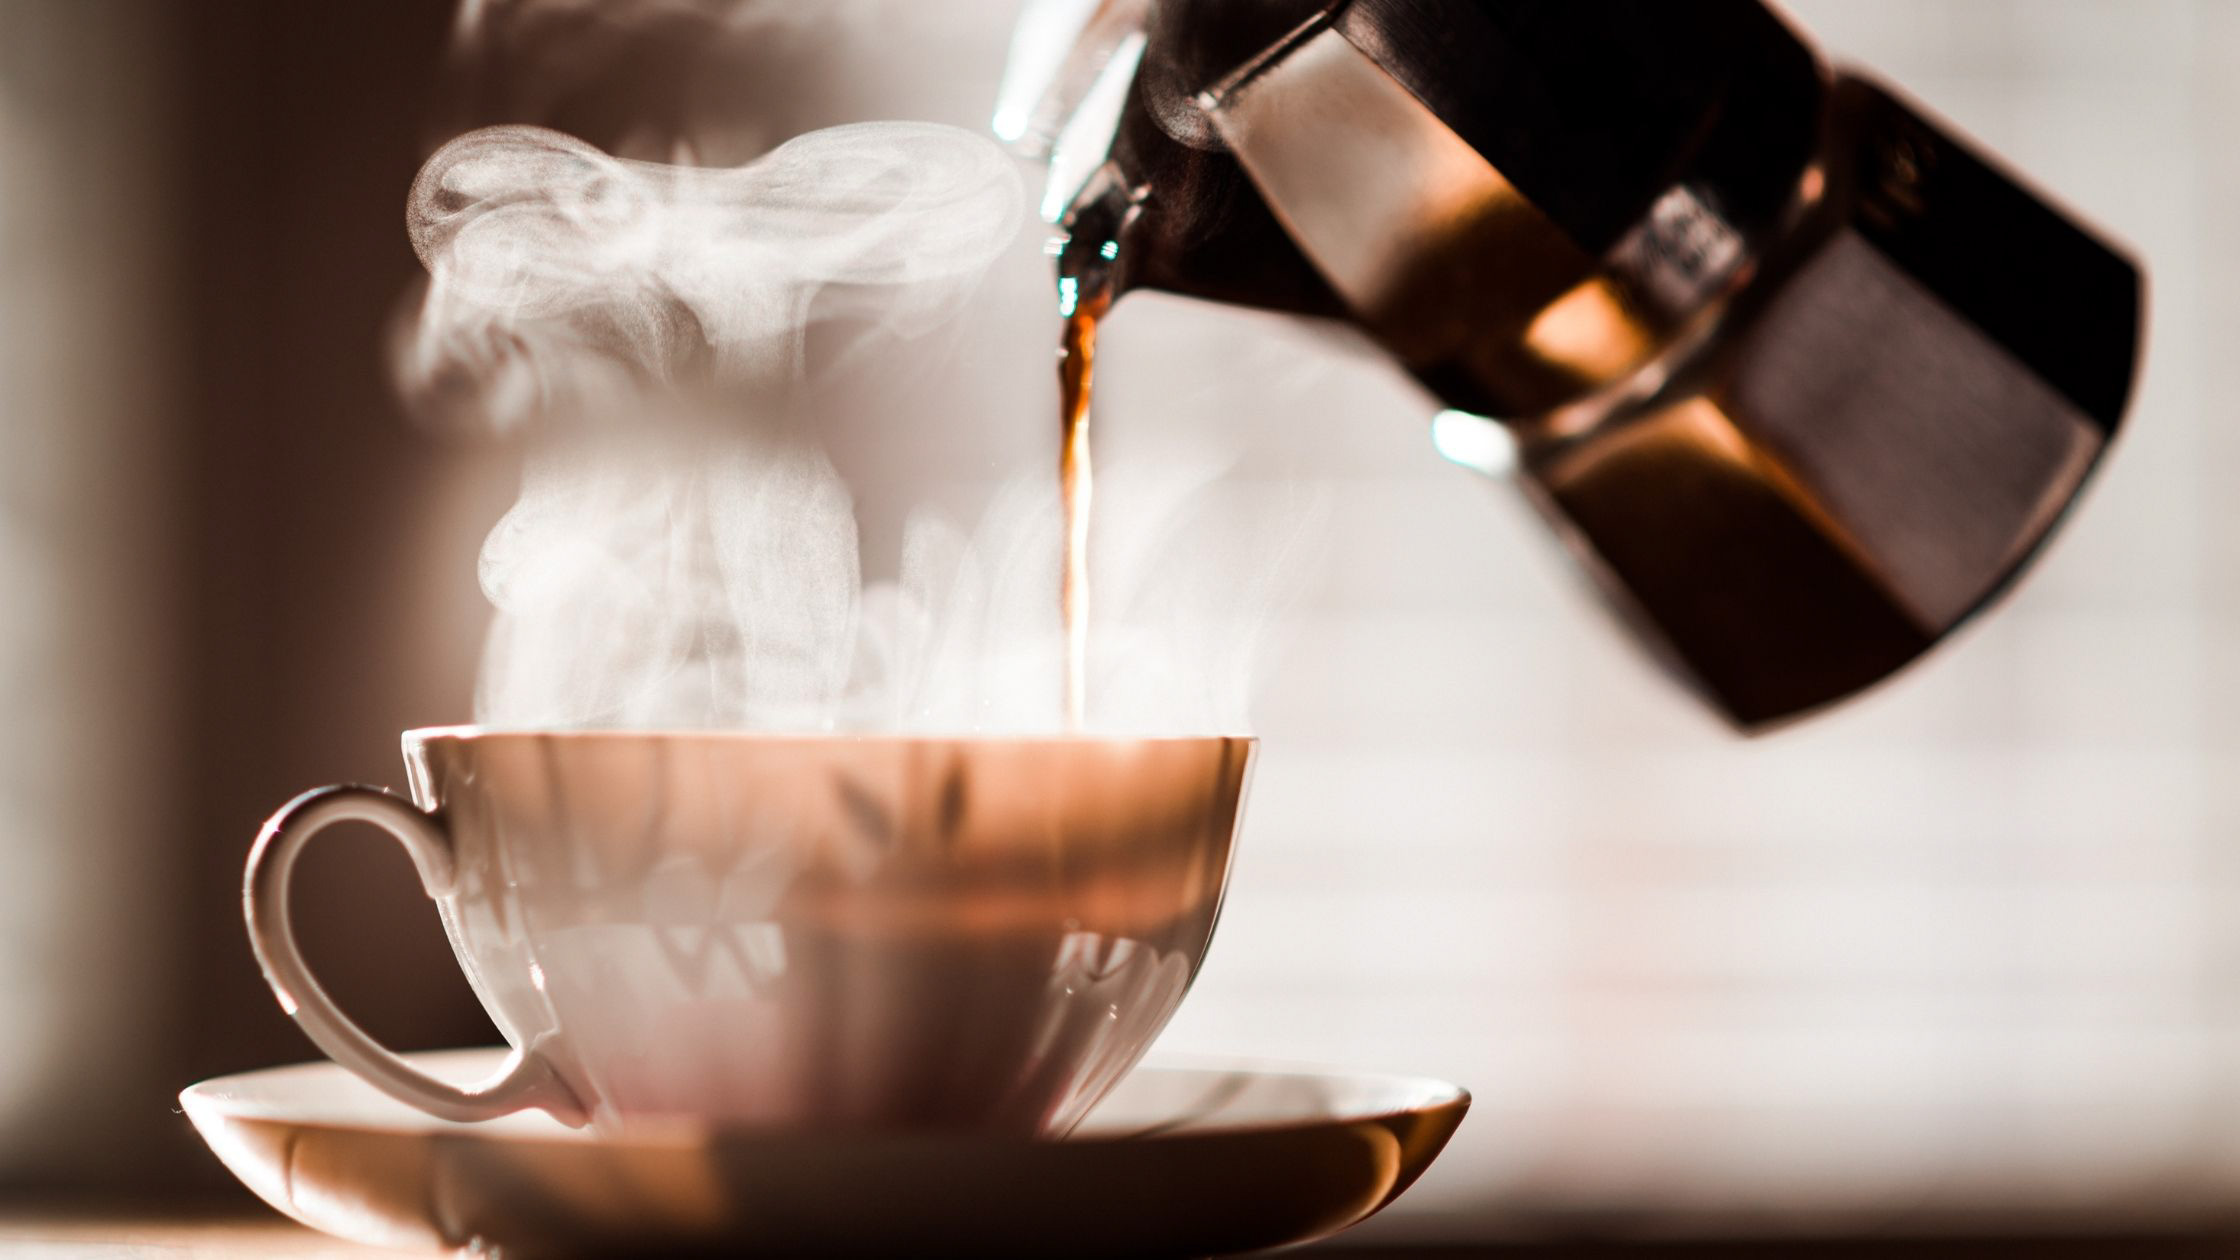 Pouring morning coffee Image - Canva 